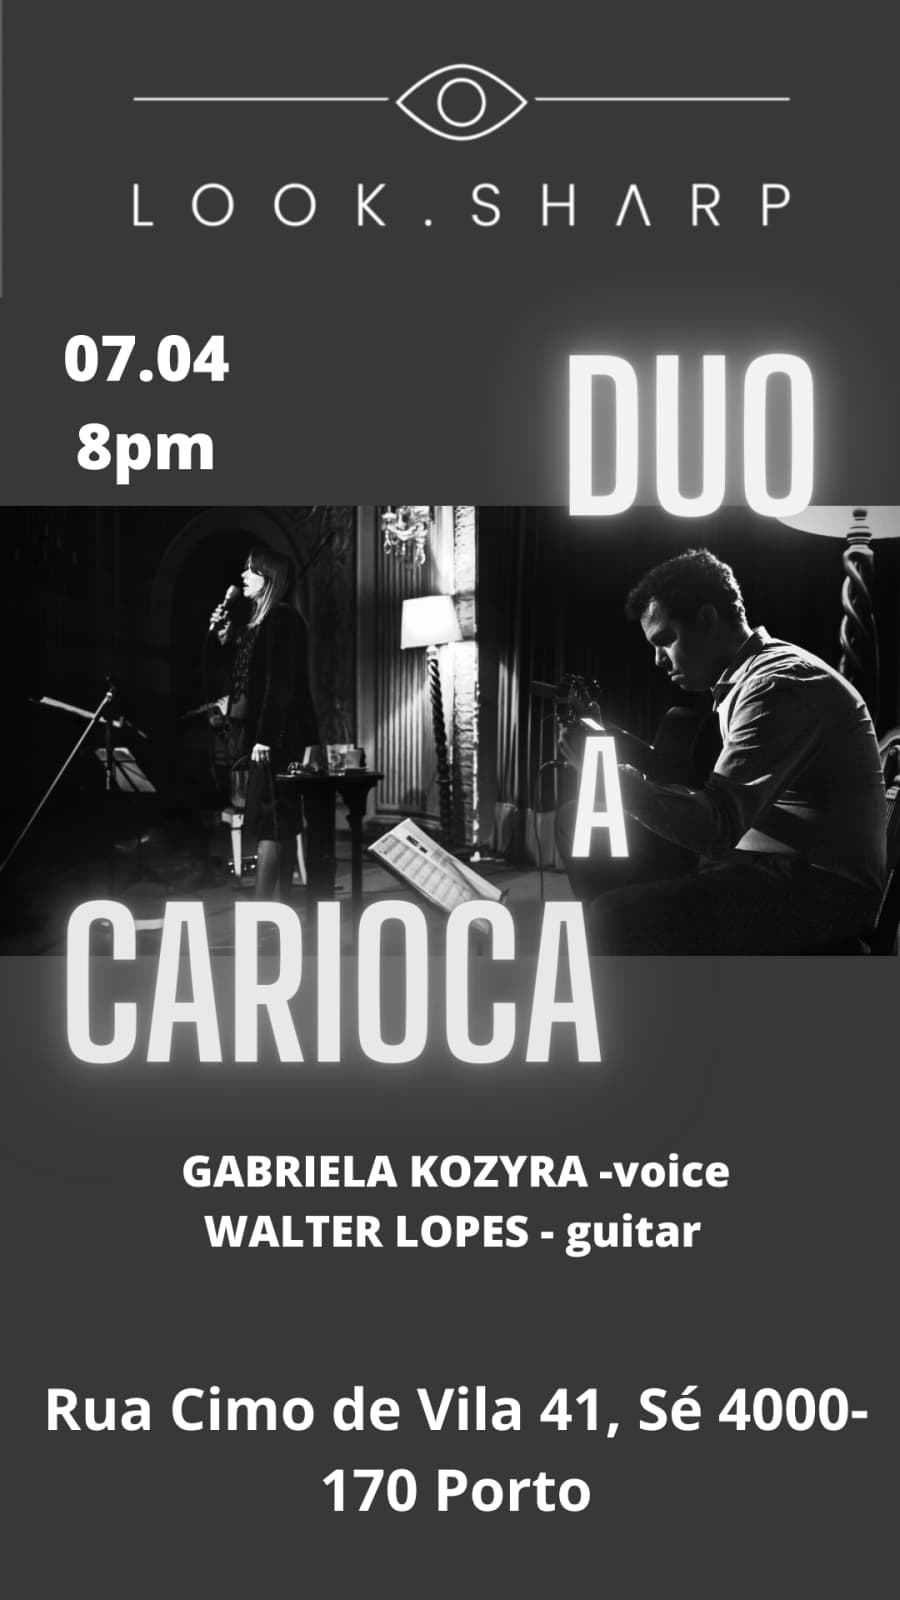 GABRIELA KOZYRA & WALTER LOPES will be the live duo to perform in our cosy little space tonight delivering a mix their unique take on Brazilian Pop & Bossa Nova! Join us for the Friday Night Early Evening Event whilst sampling our REVISED SUMMER MENU and COCKTAILS